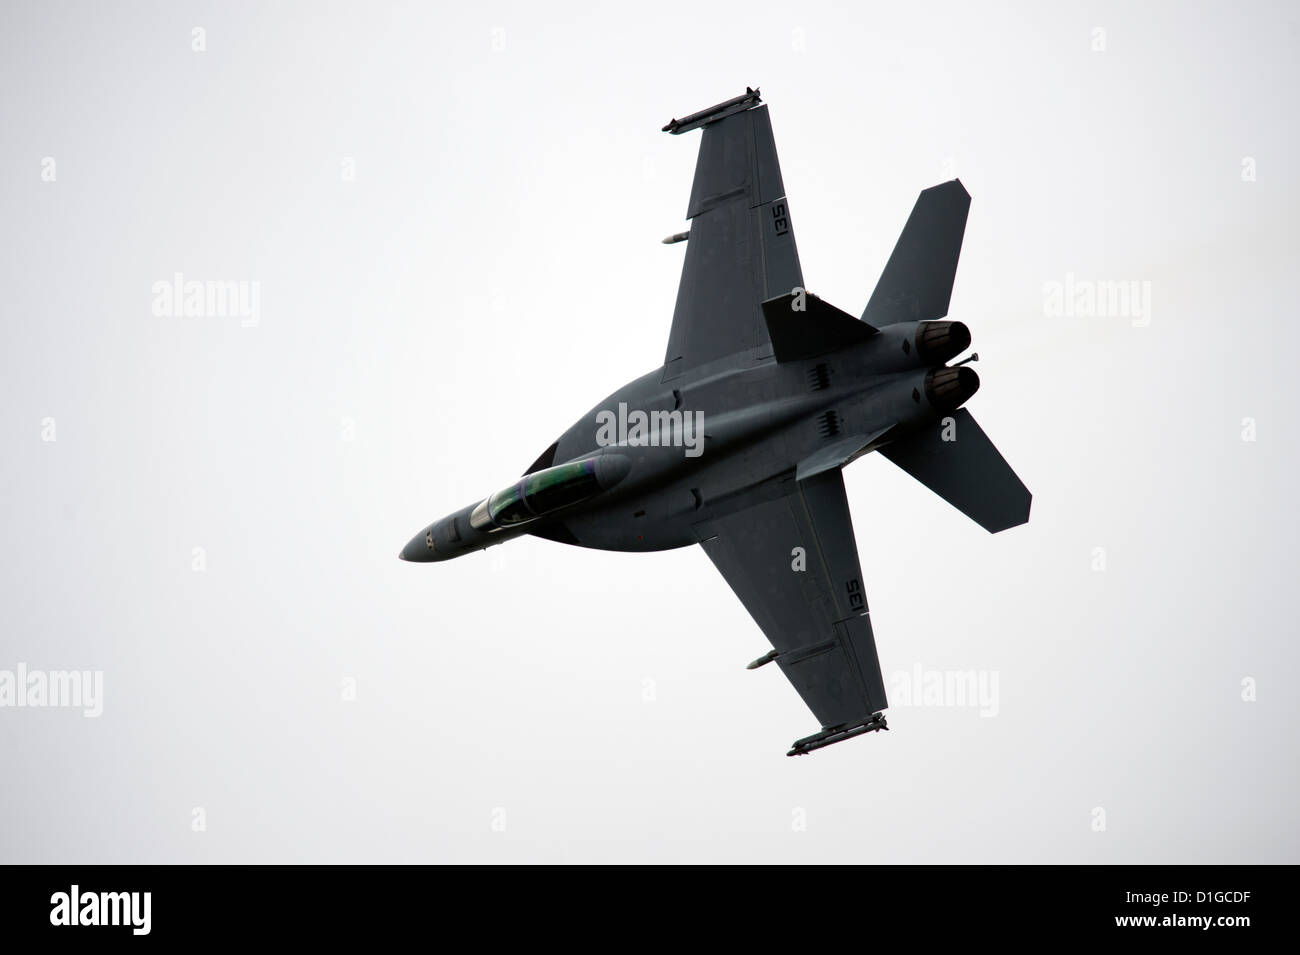 An F/A-18F Super Hornet jet aircraft is seen flying at the Farnborough International airshow, June 2012 Stock Photo